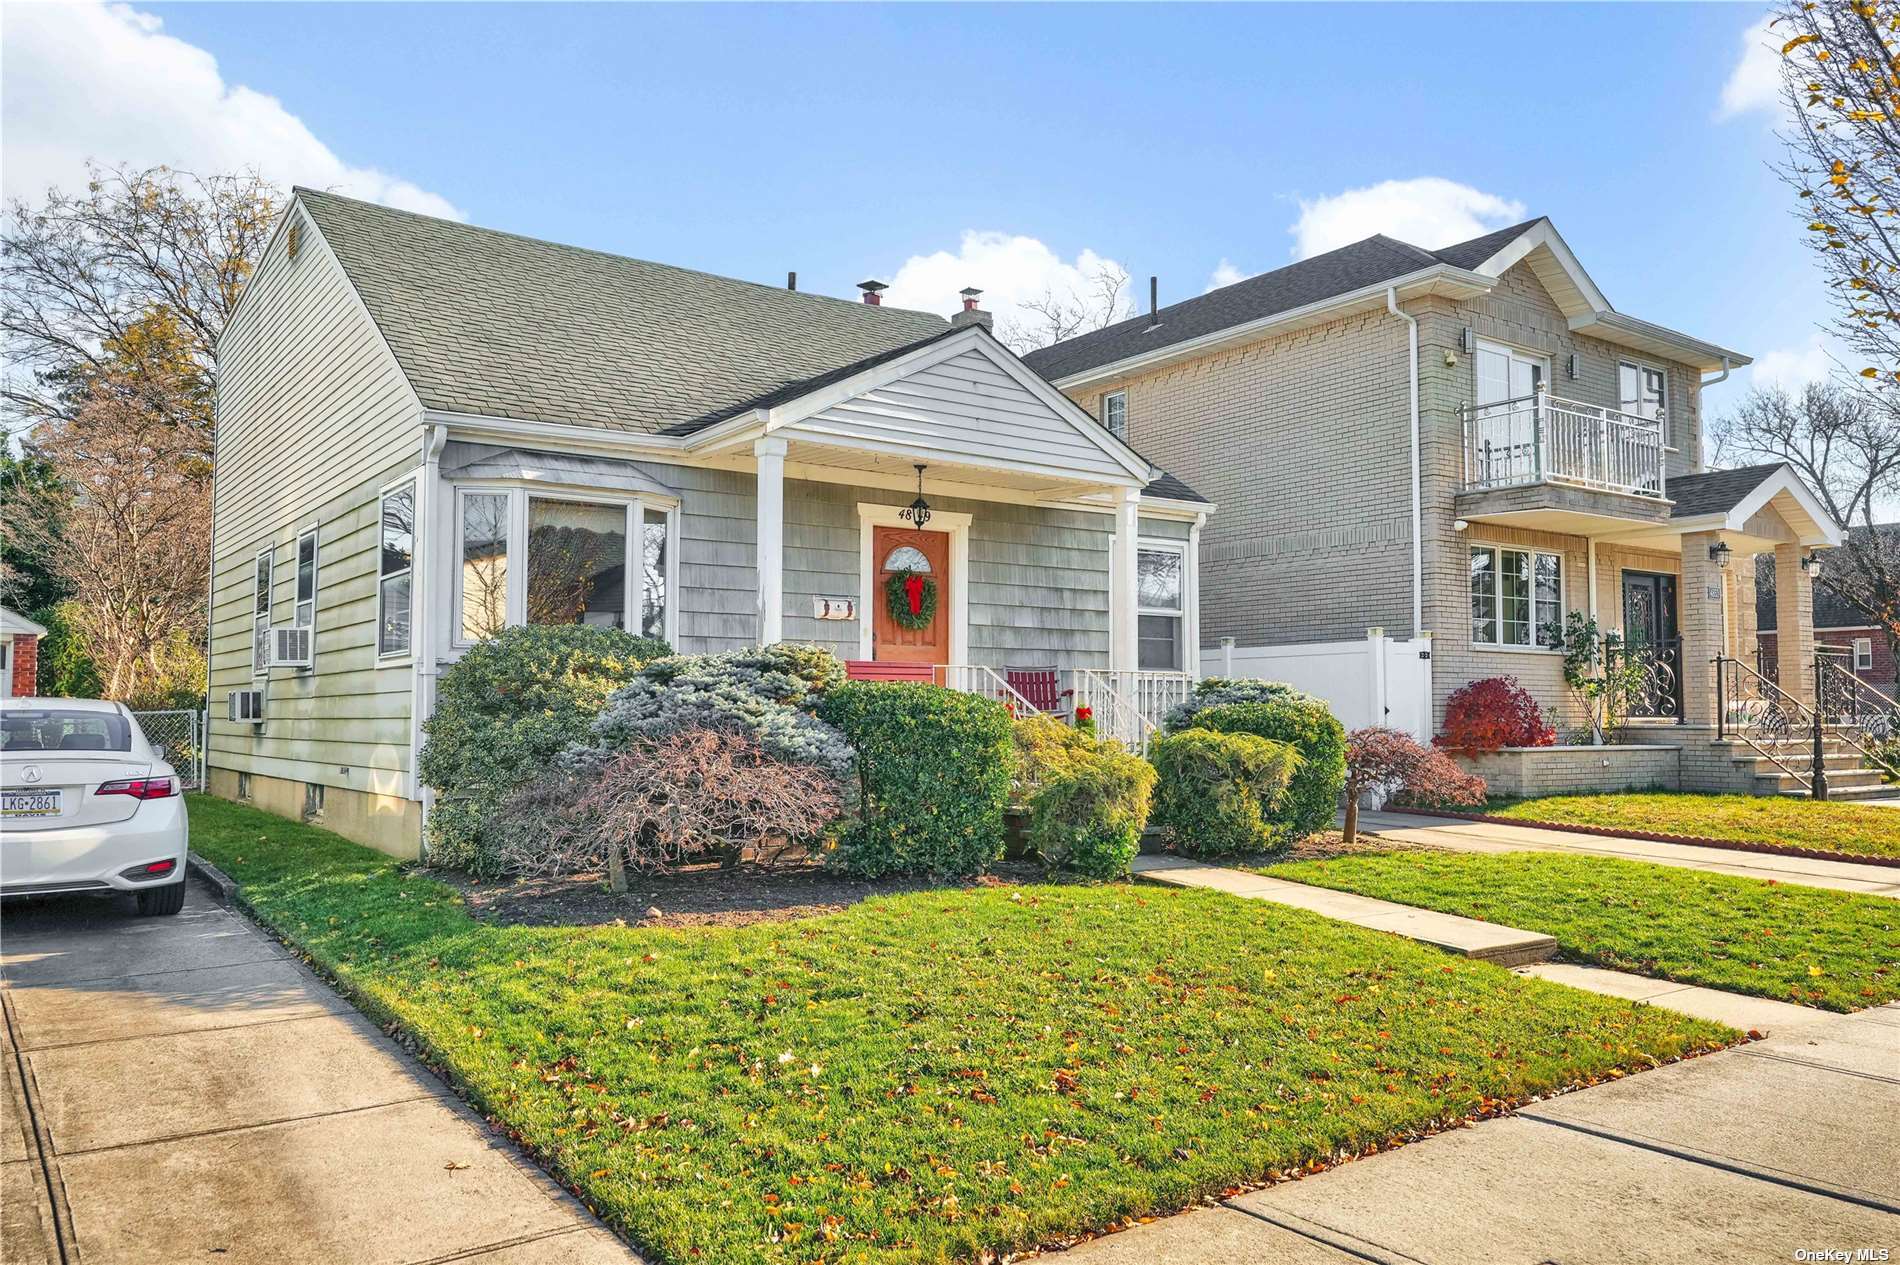 Single Family in Fresh Meadows - 196th  Queens, NY 11365